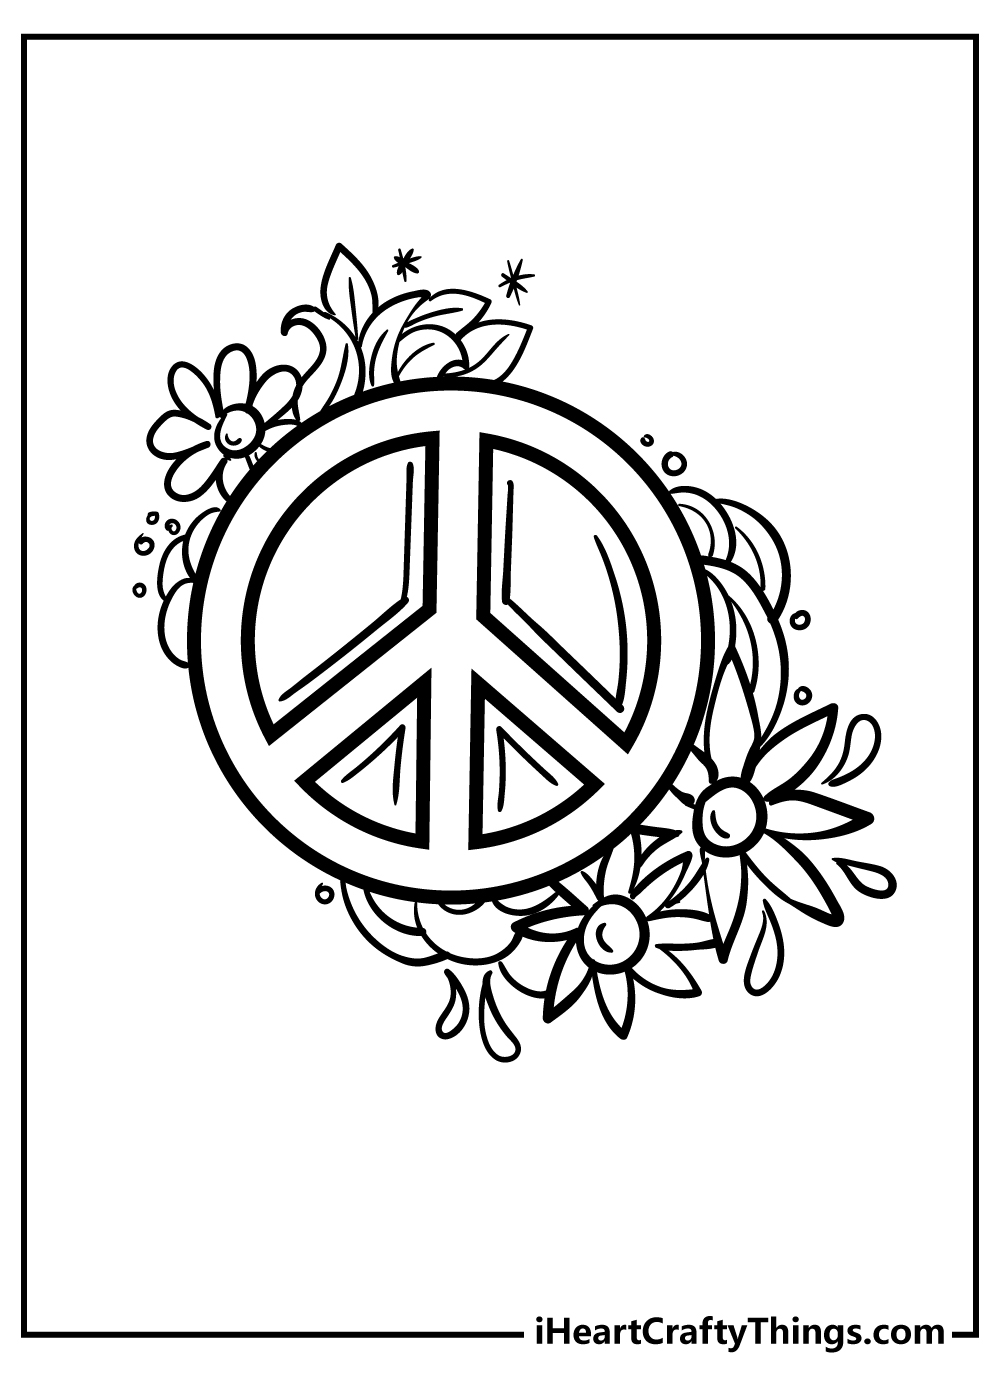 Printable Peace Coloring Pages (Updated 2023)